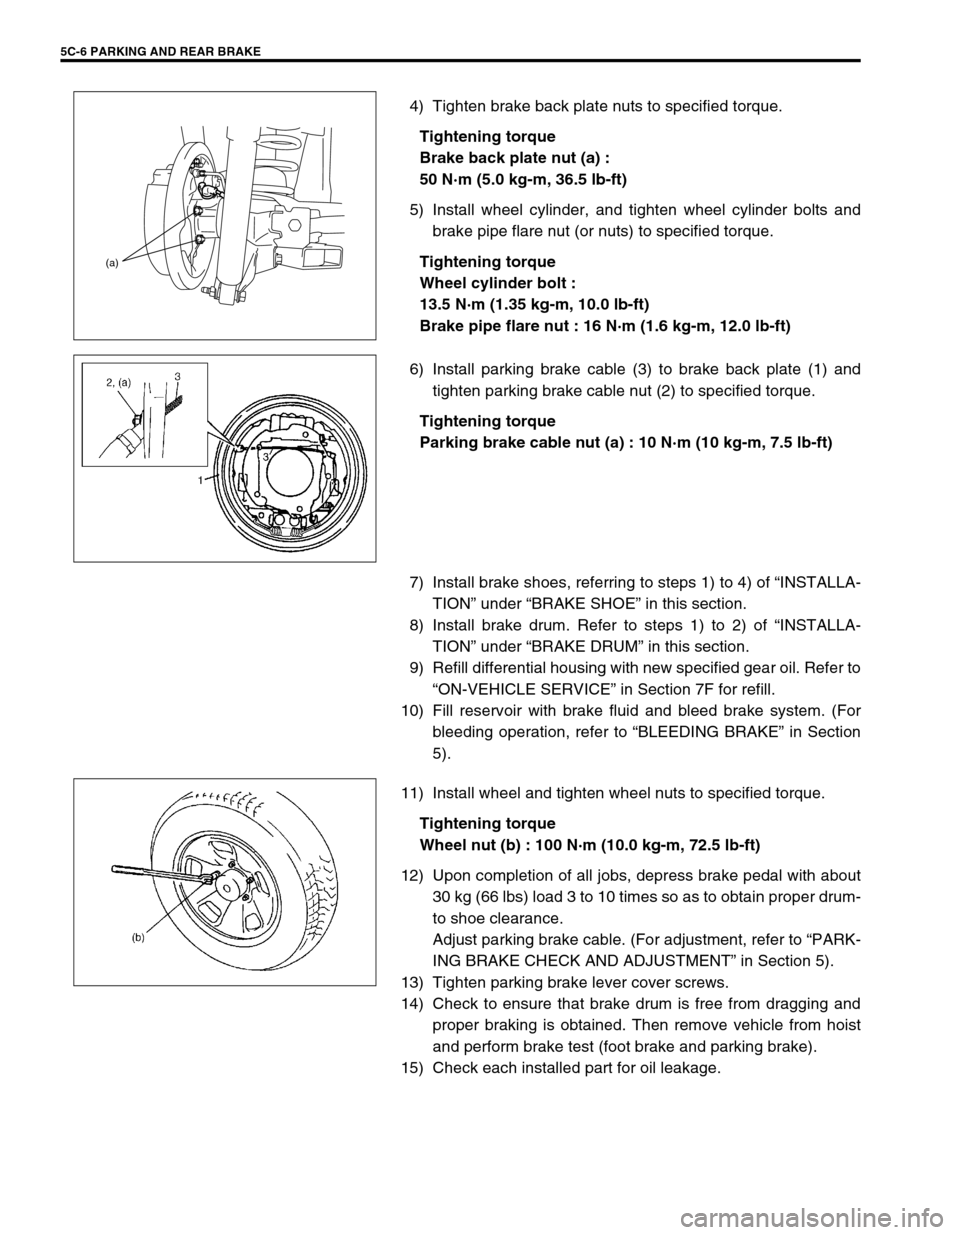 SUZUKI GRAND VITARA 1999 2.G Owners Manual 5C-6 PARKING AND REAR BRAKE
4) Tighten brake back plate nuts to specified torque.
Tightening torque
Brake back plate nut (a) :
50 N·m (5.0 kg-m, 36.5 lb-ft)
5) Install wheel cylinder, and tighten whe